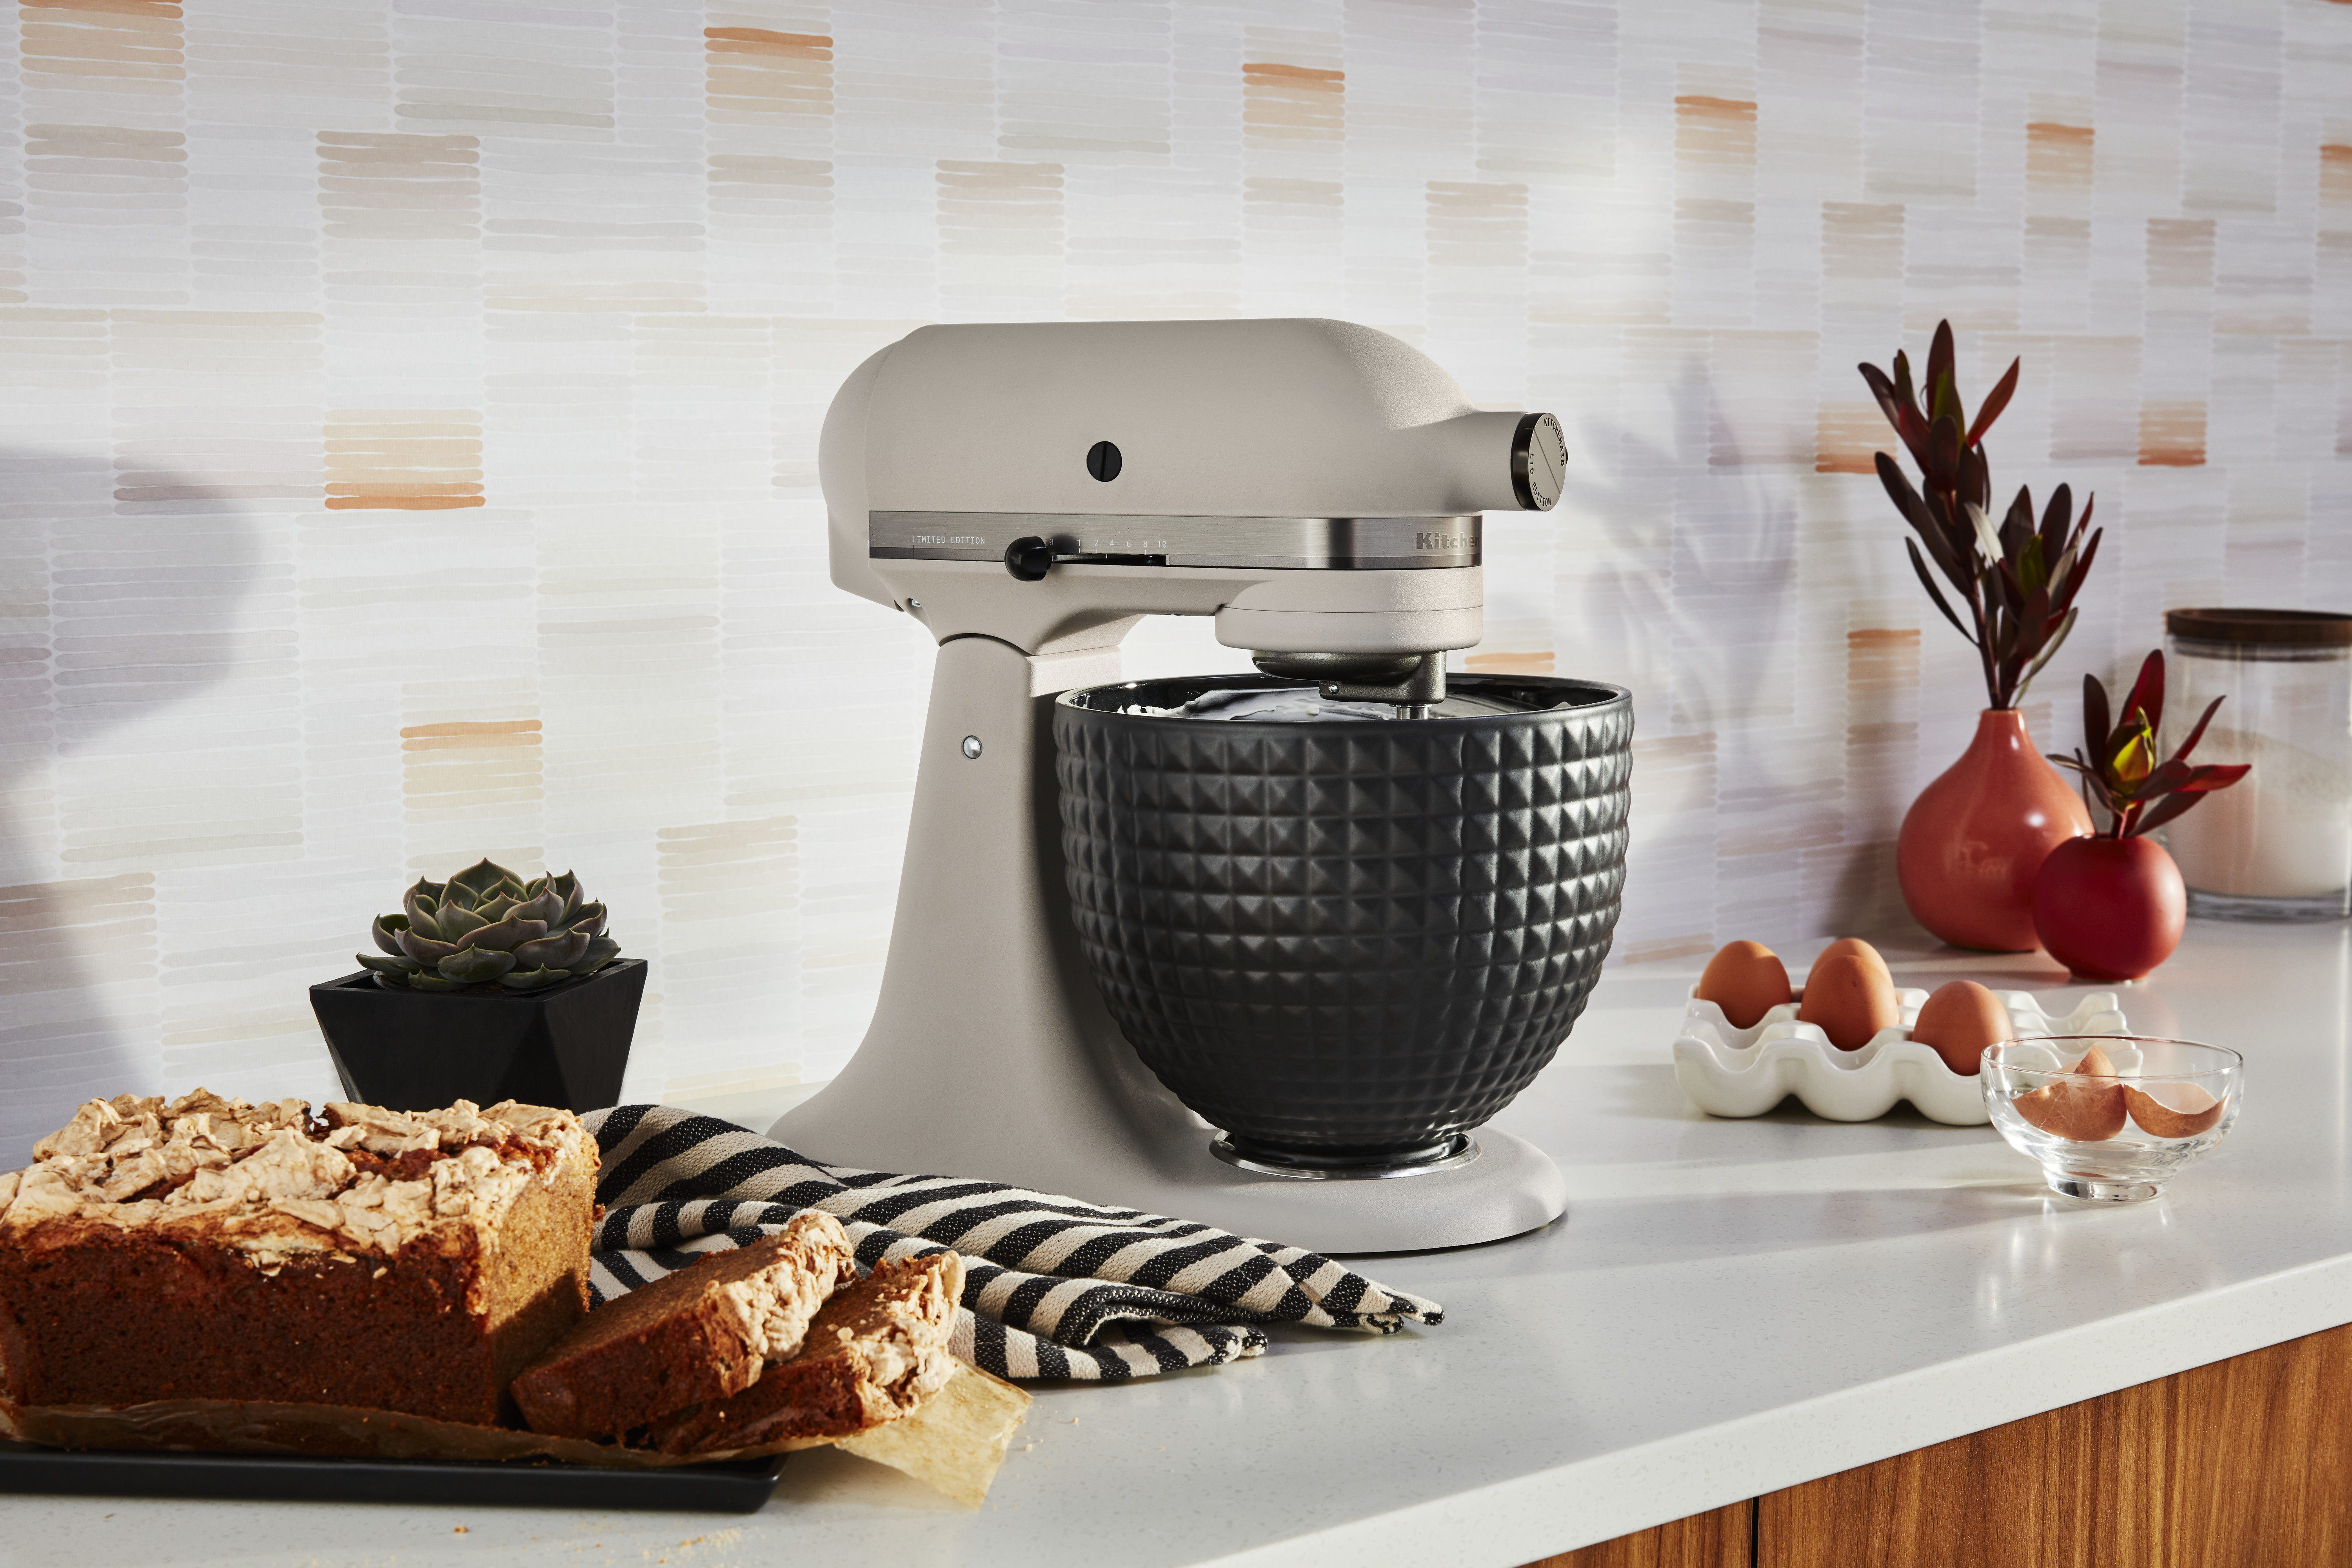 KitchenAid Light and Shadow Limited Edition Artisan Stand Mixer